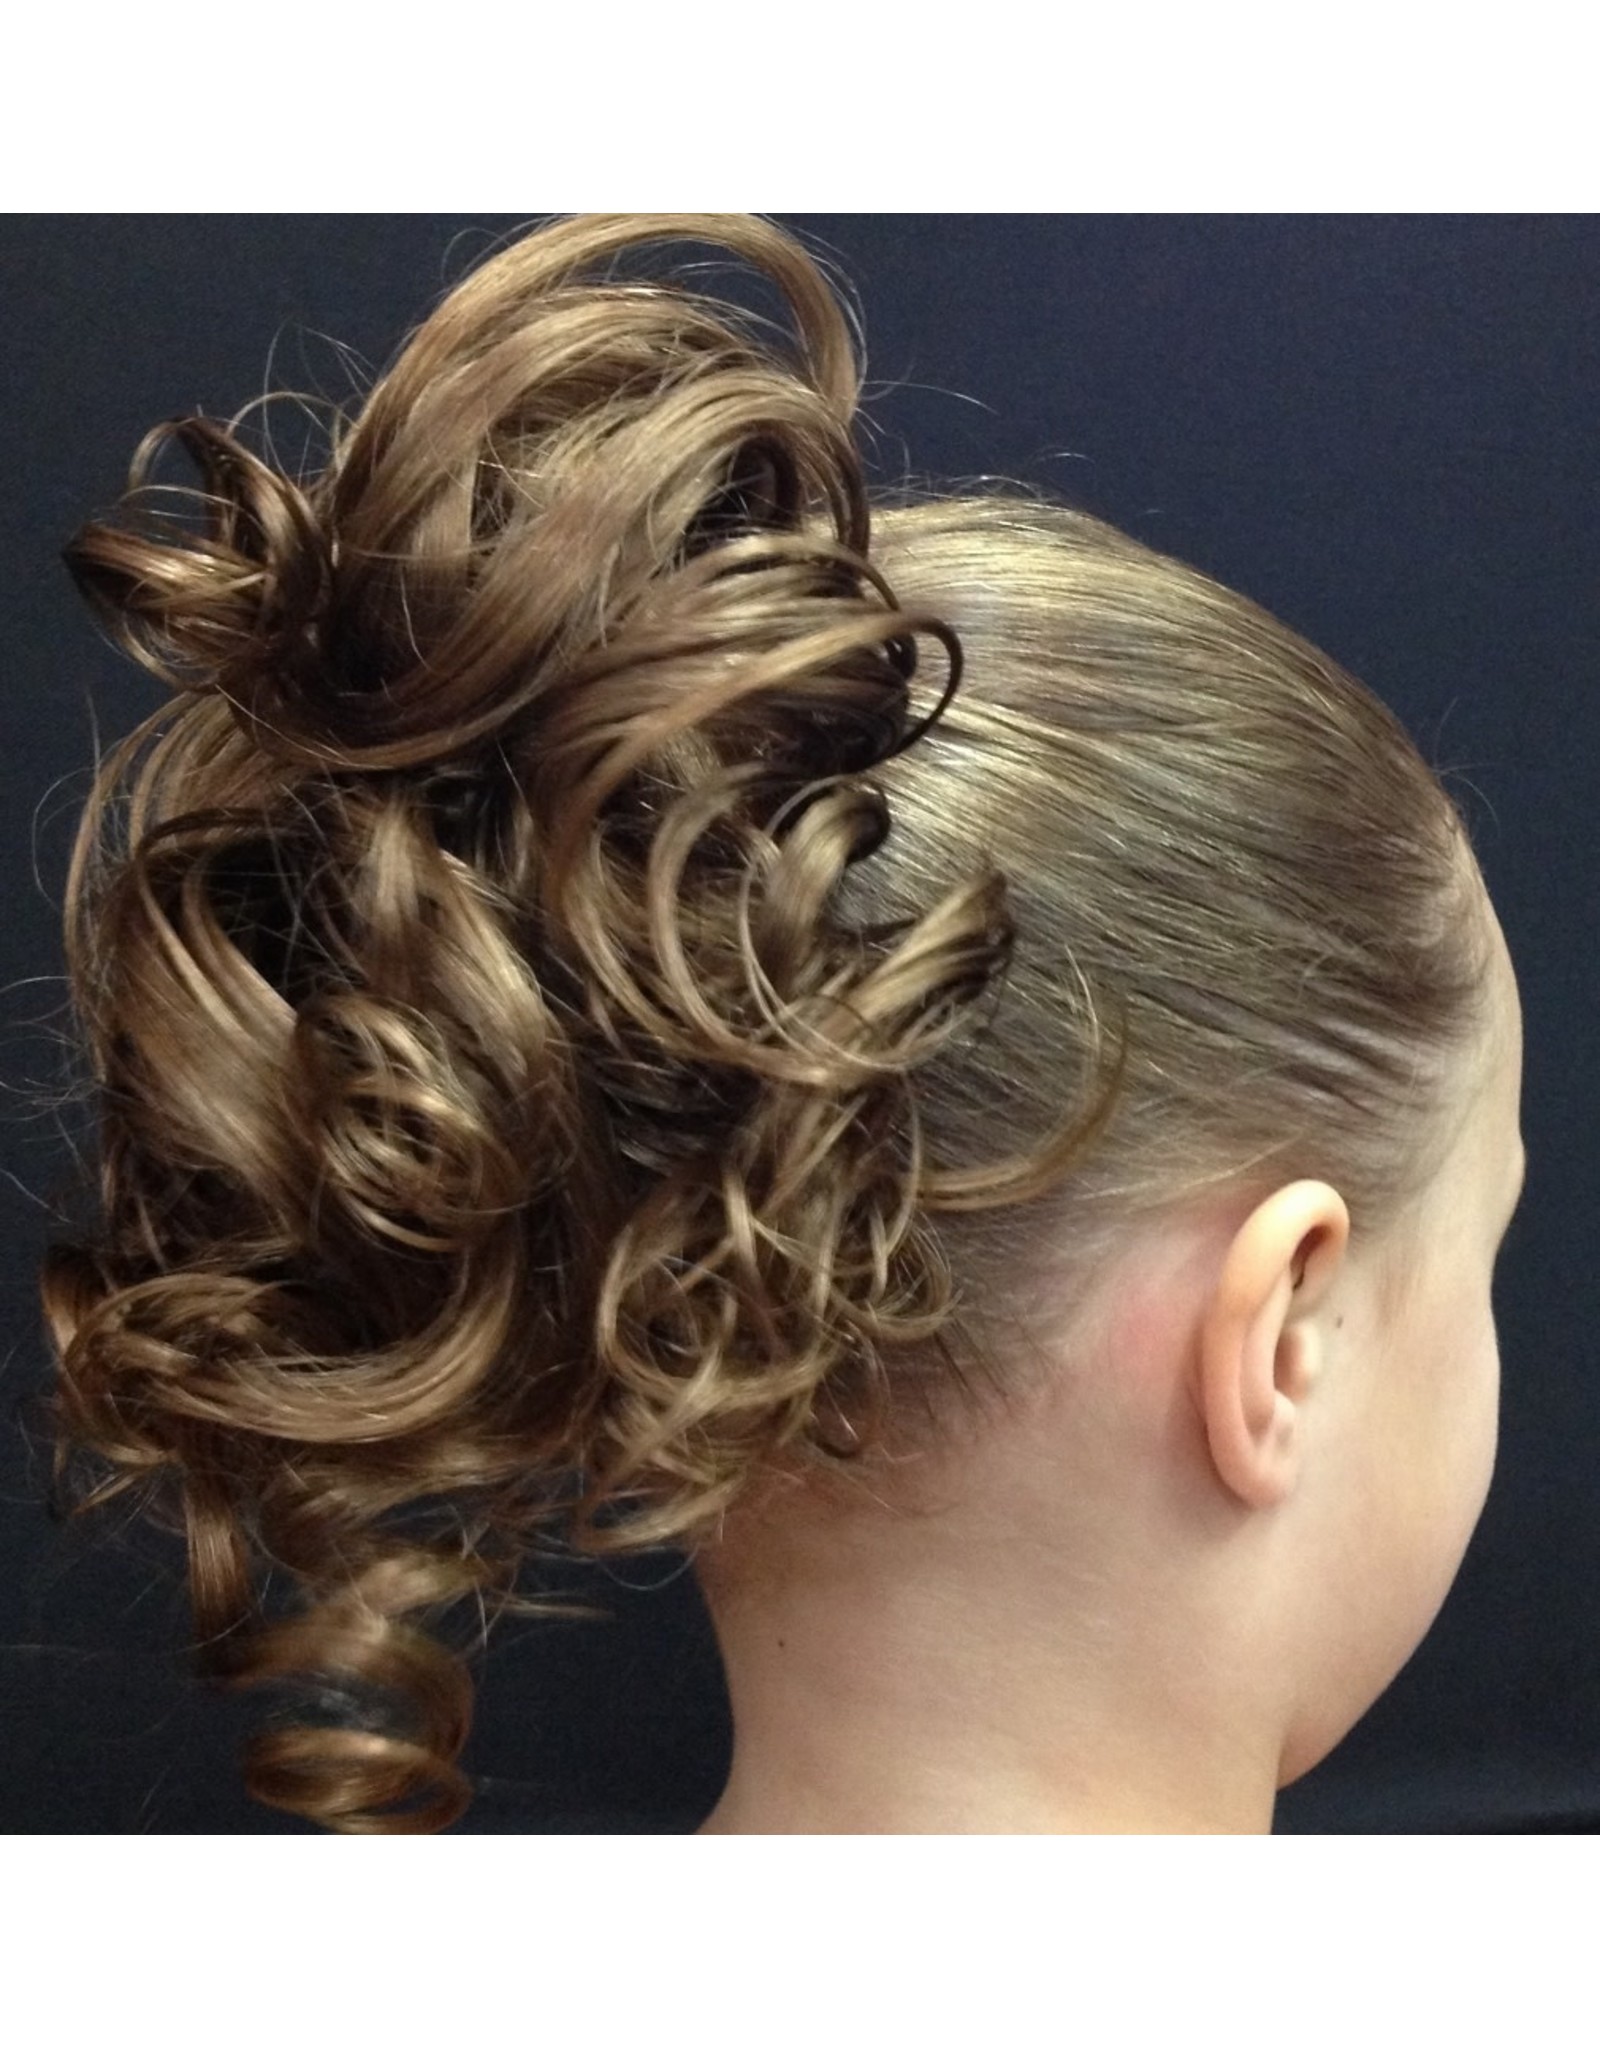 Dancer Hair Do's #84: Loose Curl Hairpiece